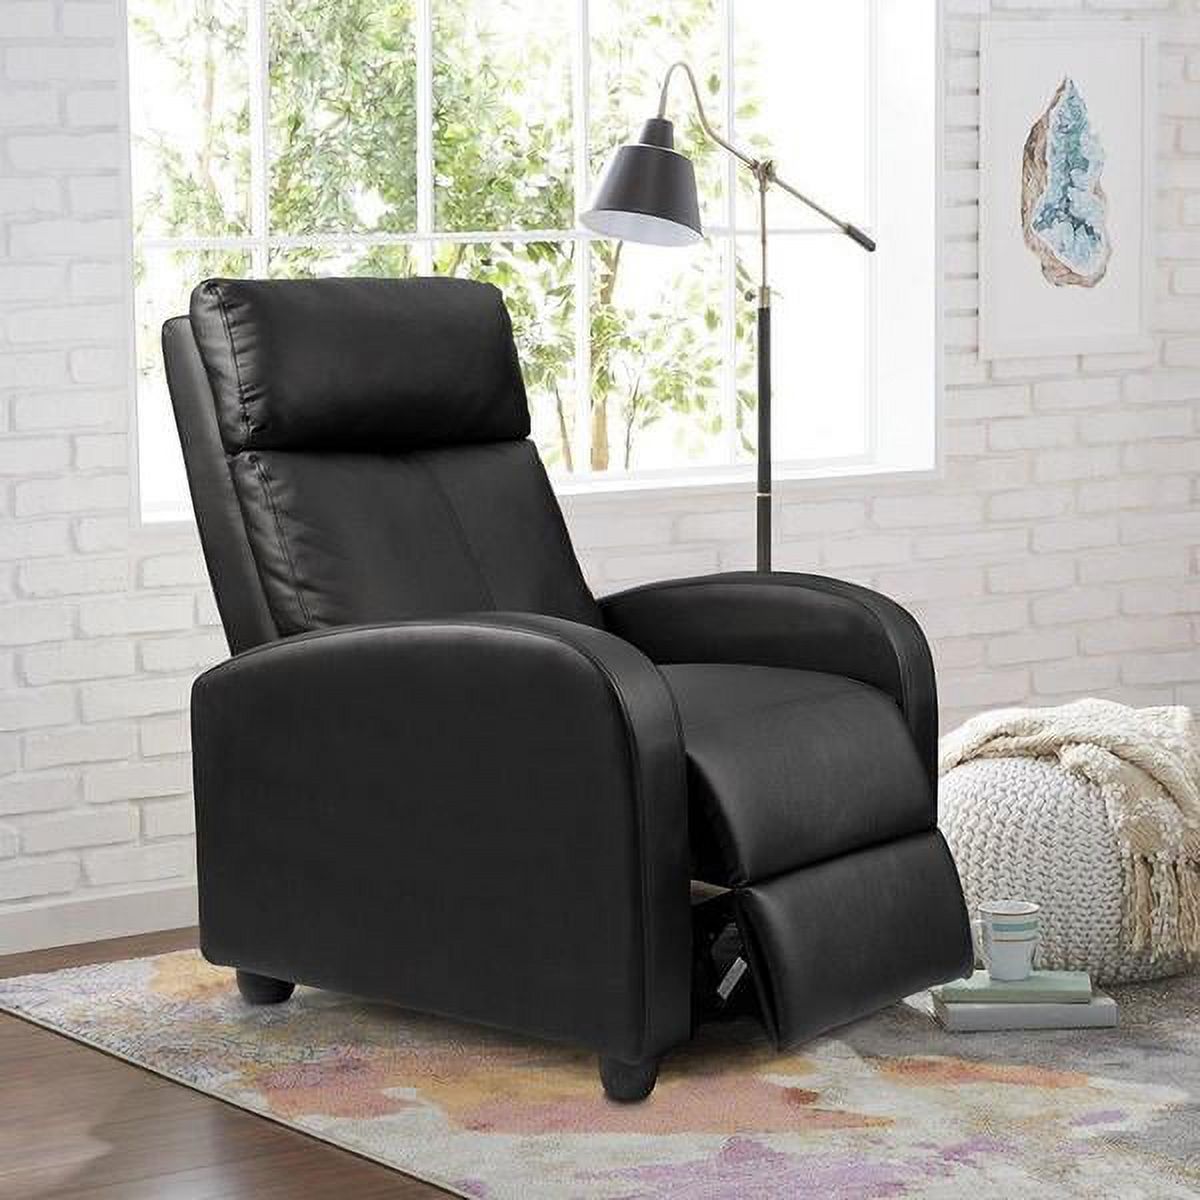 Lacoo Home Theater Recliner with Padded Seat and Backrest, Black - image 3 of 8